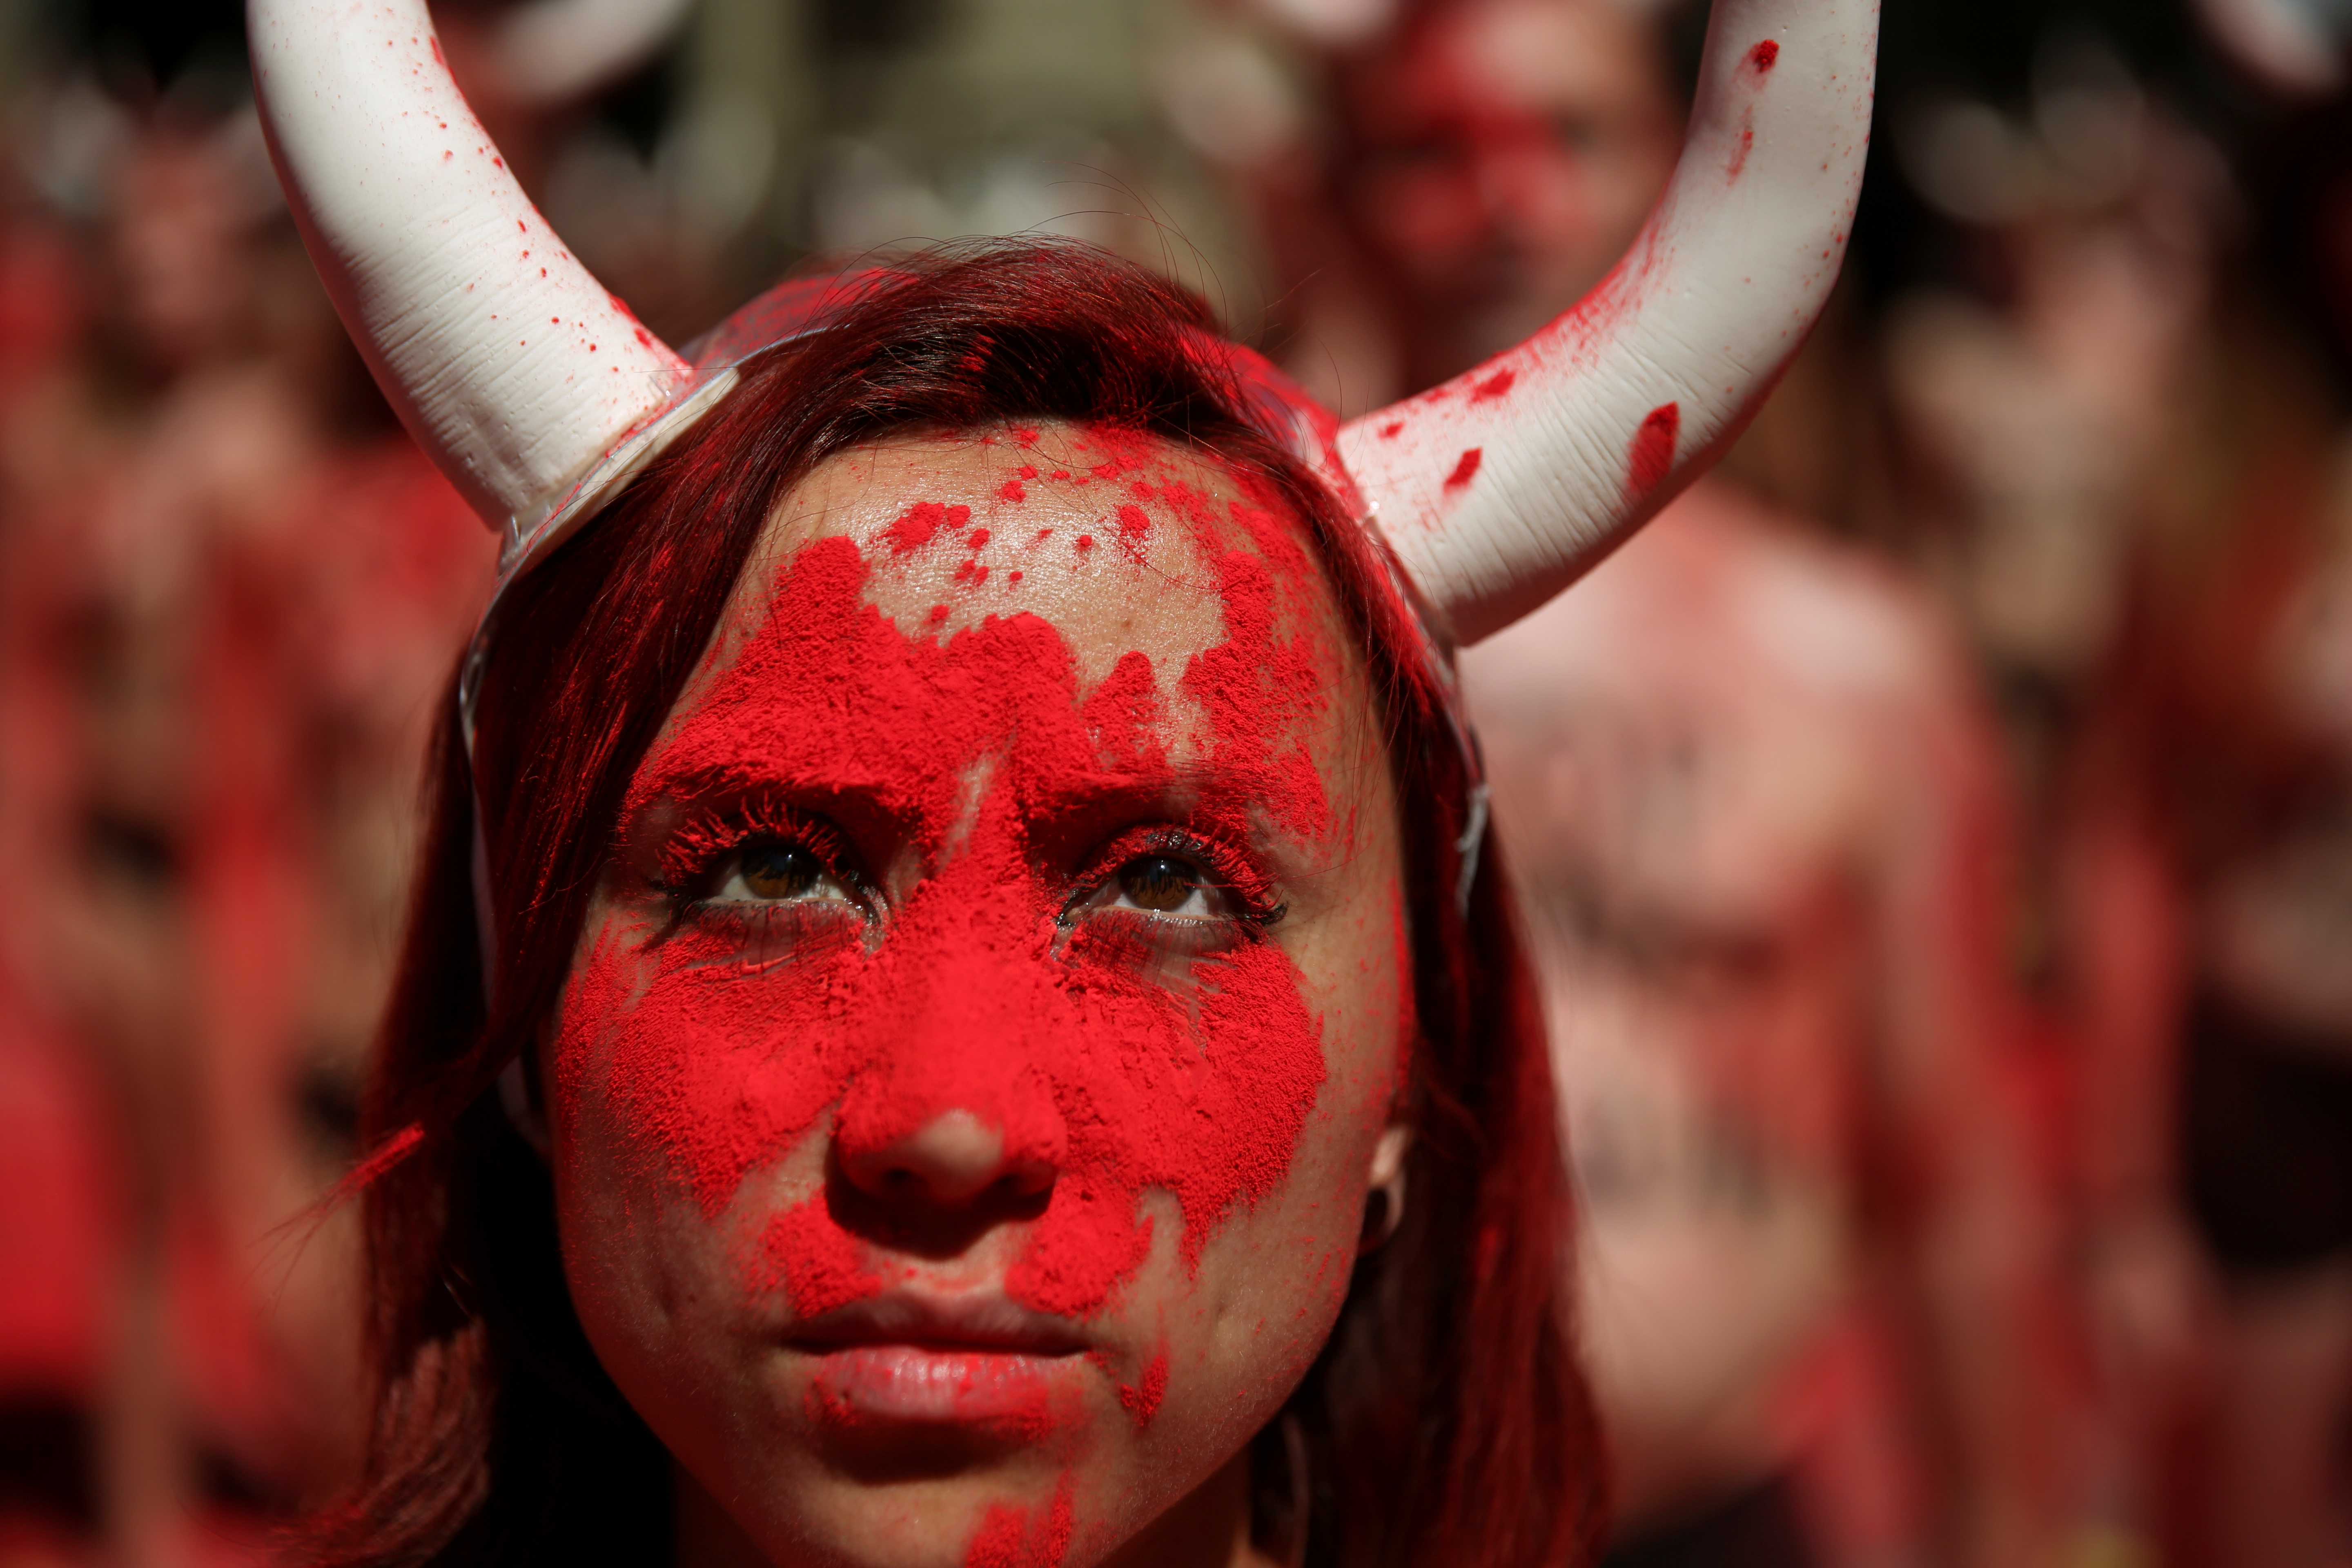 A protestor during a July 2017 demonstration against bullfighting before the start of Spain’s famous running of the bulls San Fermin festival. Bullfighting is among the many popular discussions, ranging from racial profiling to football, featured on Kialo, one of several news startups working to foster civic discourse